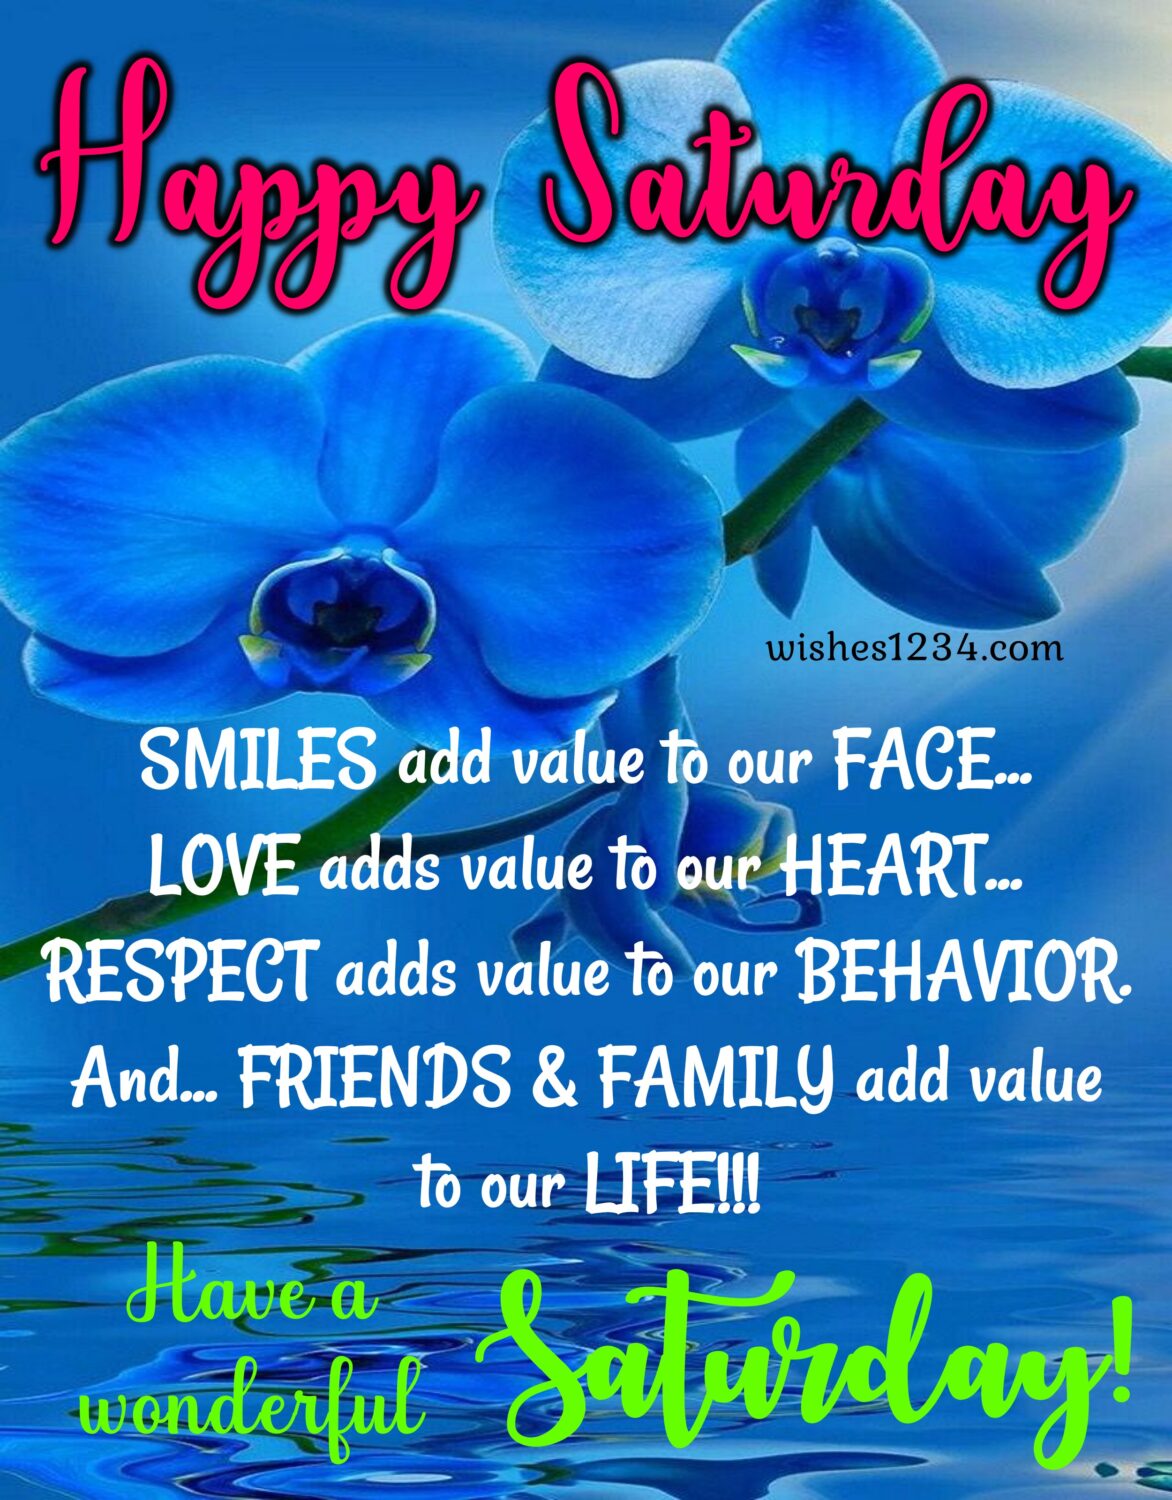 Happy Saturday quotes with blue orchid, Happy Saturday quotes and blessings images.